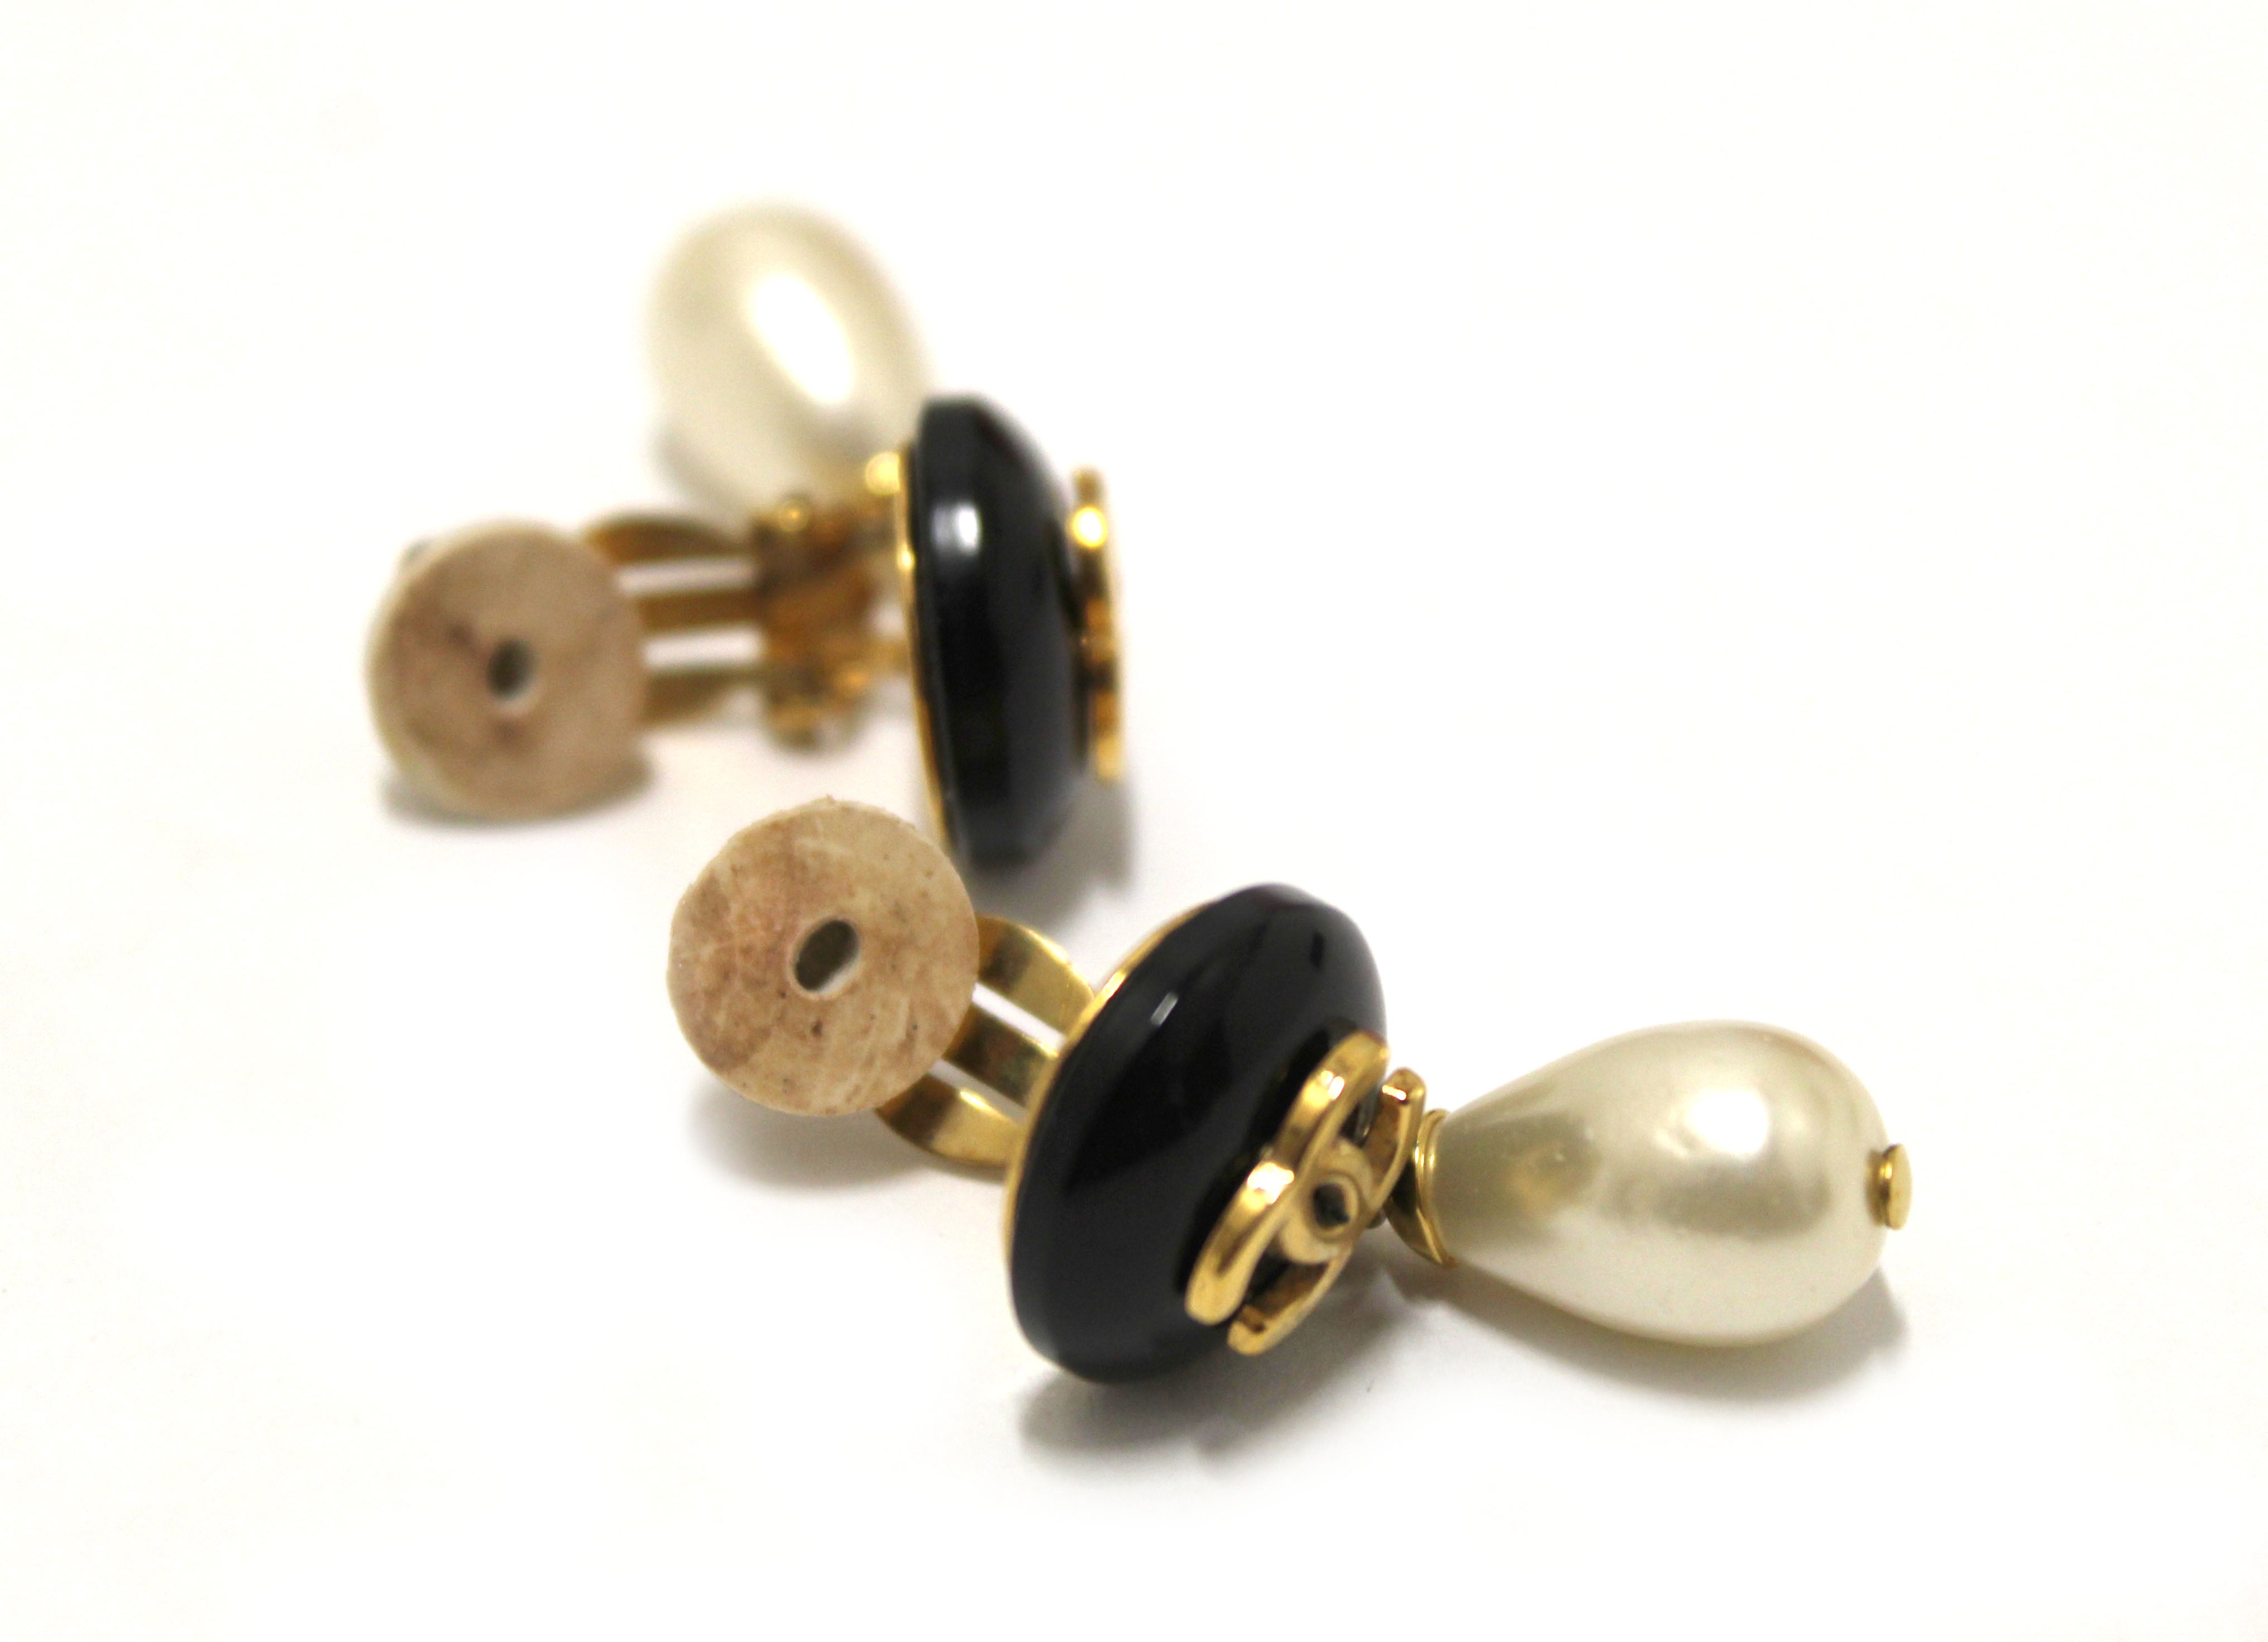 Gold Metal and Black Satin Woven Chain CC Earrings, 2012